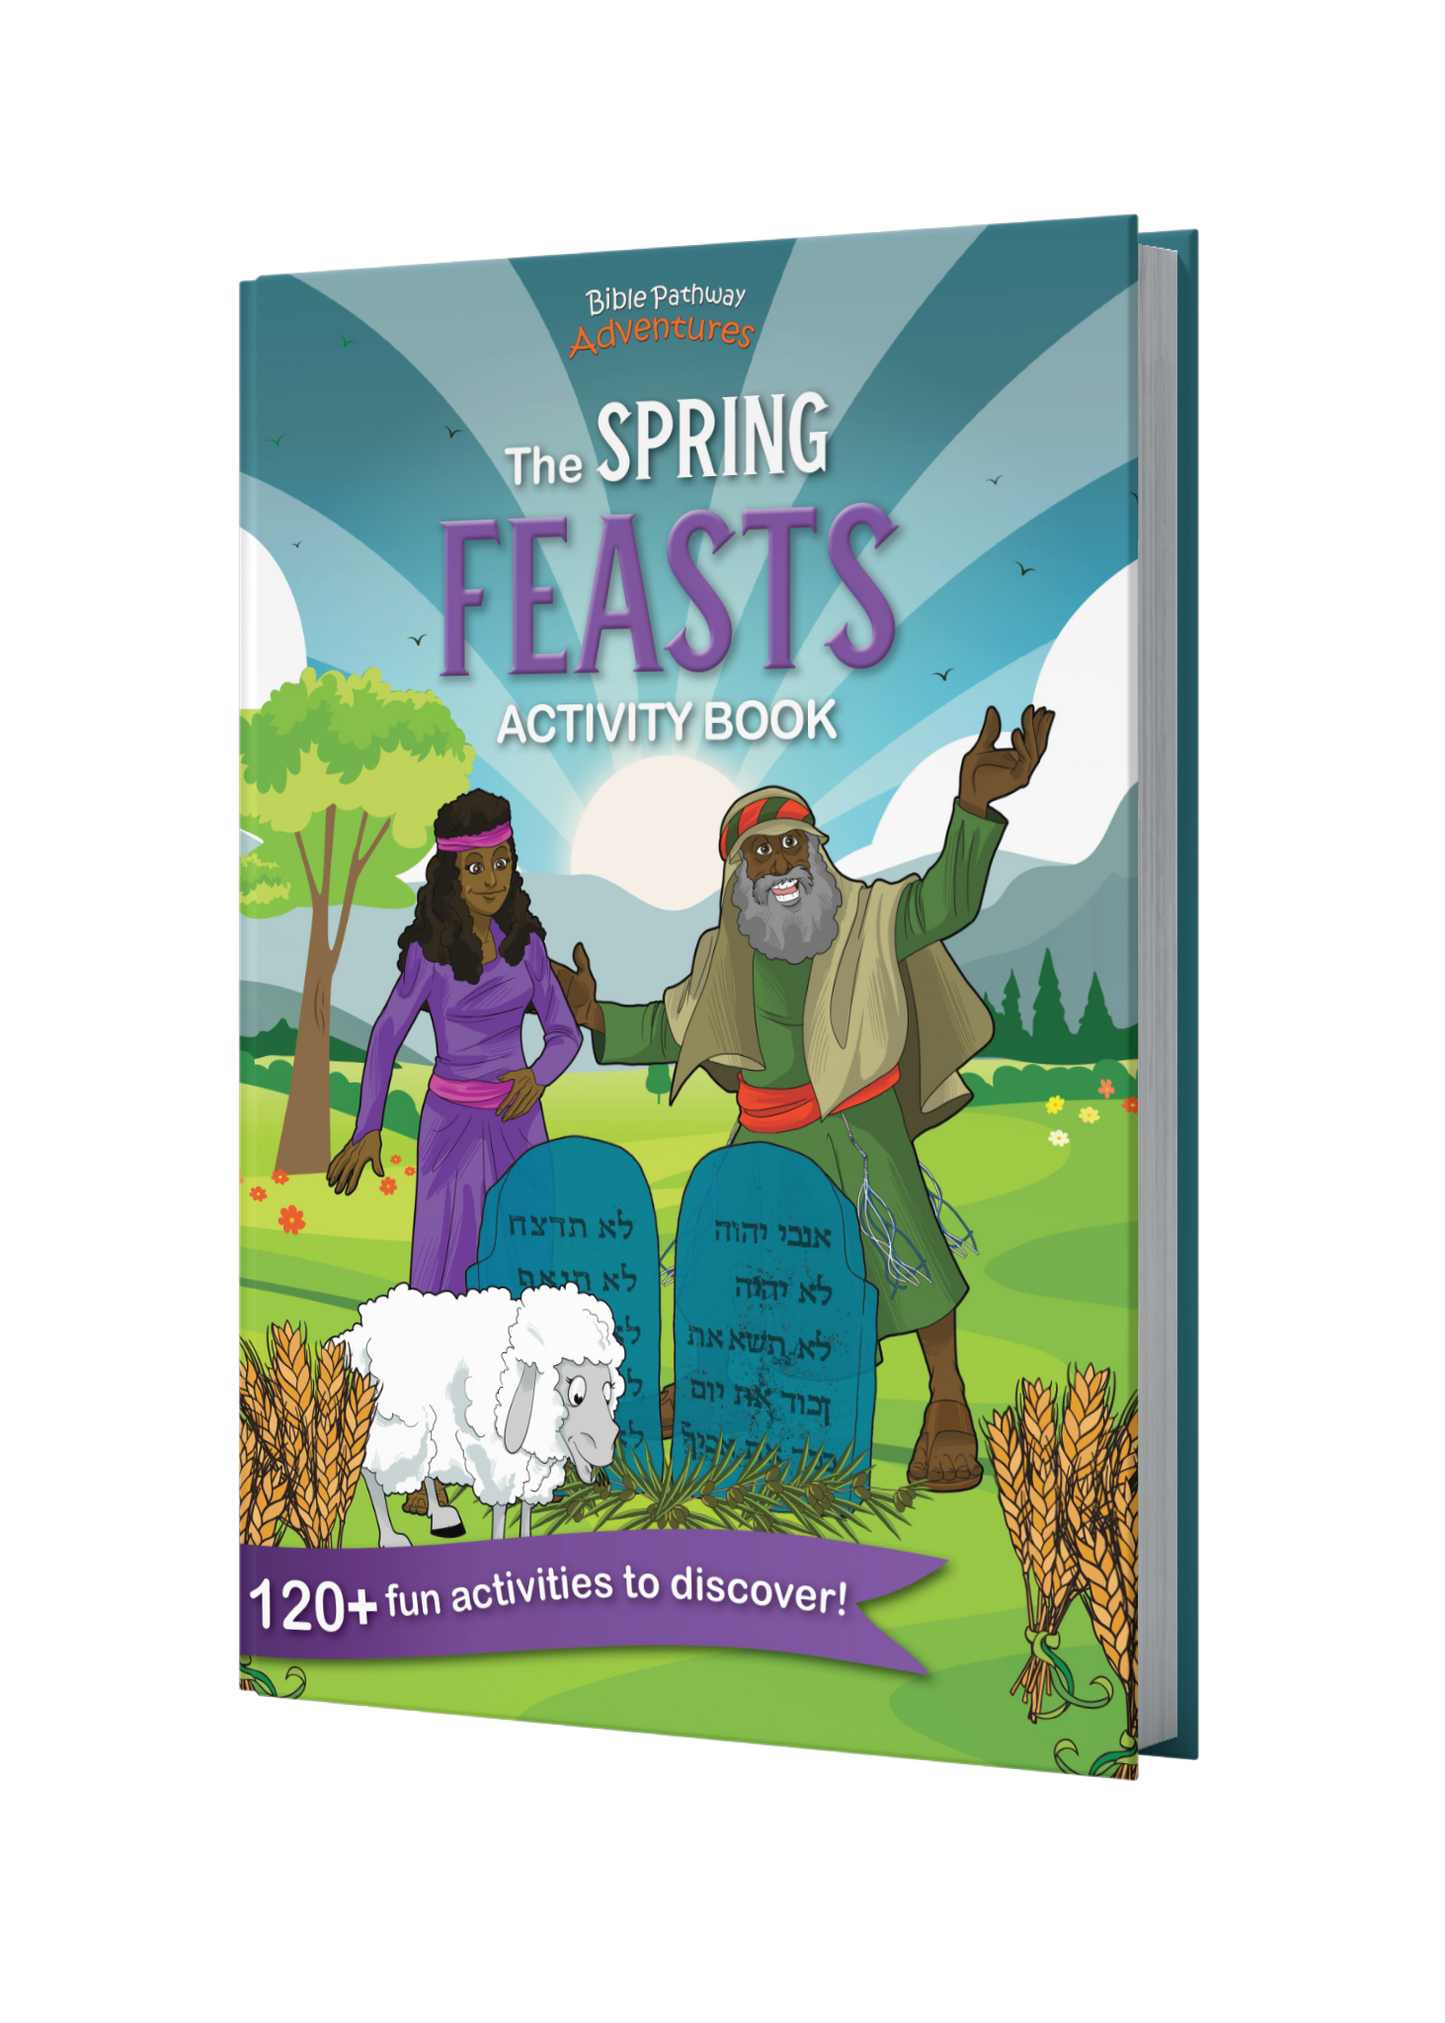 The Spring Feasts Activity Book